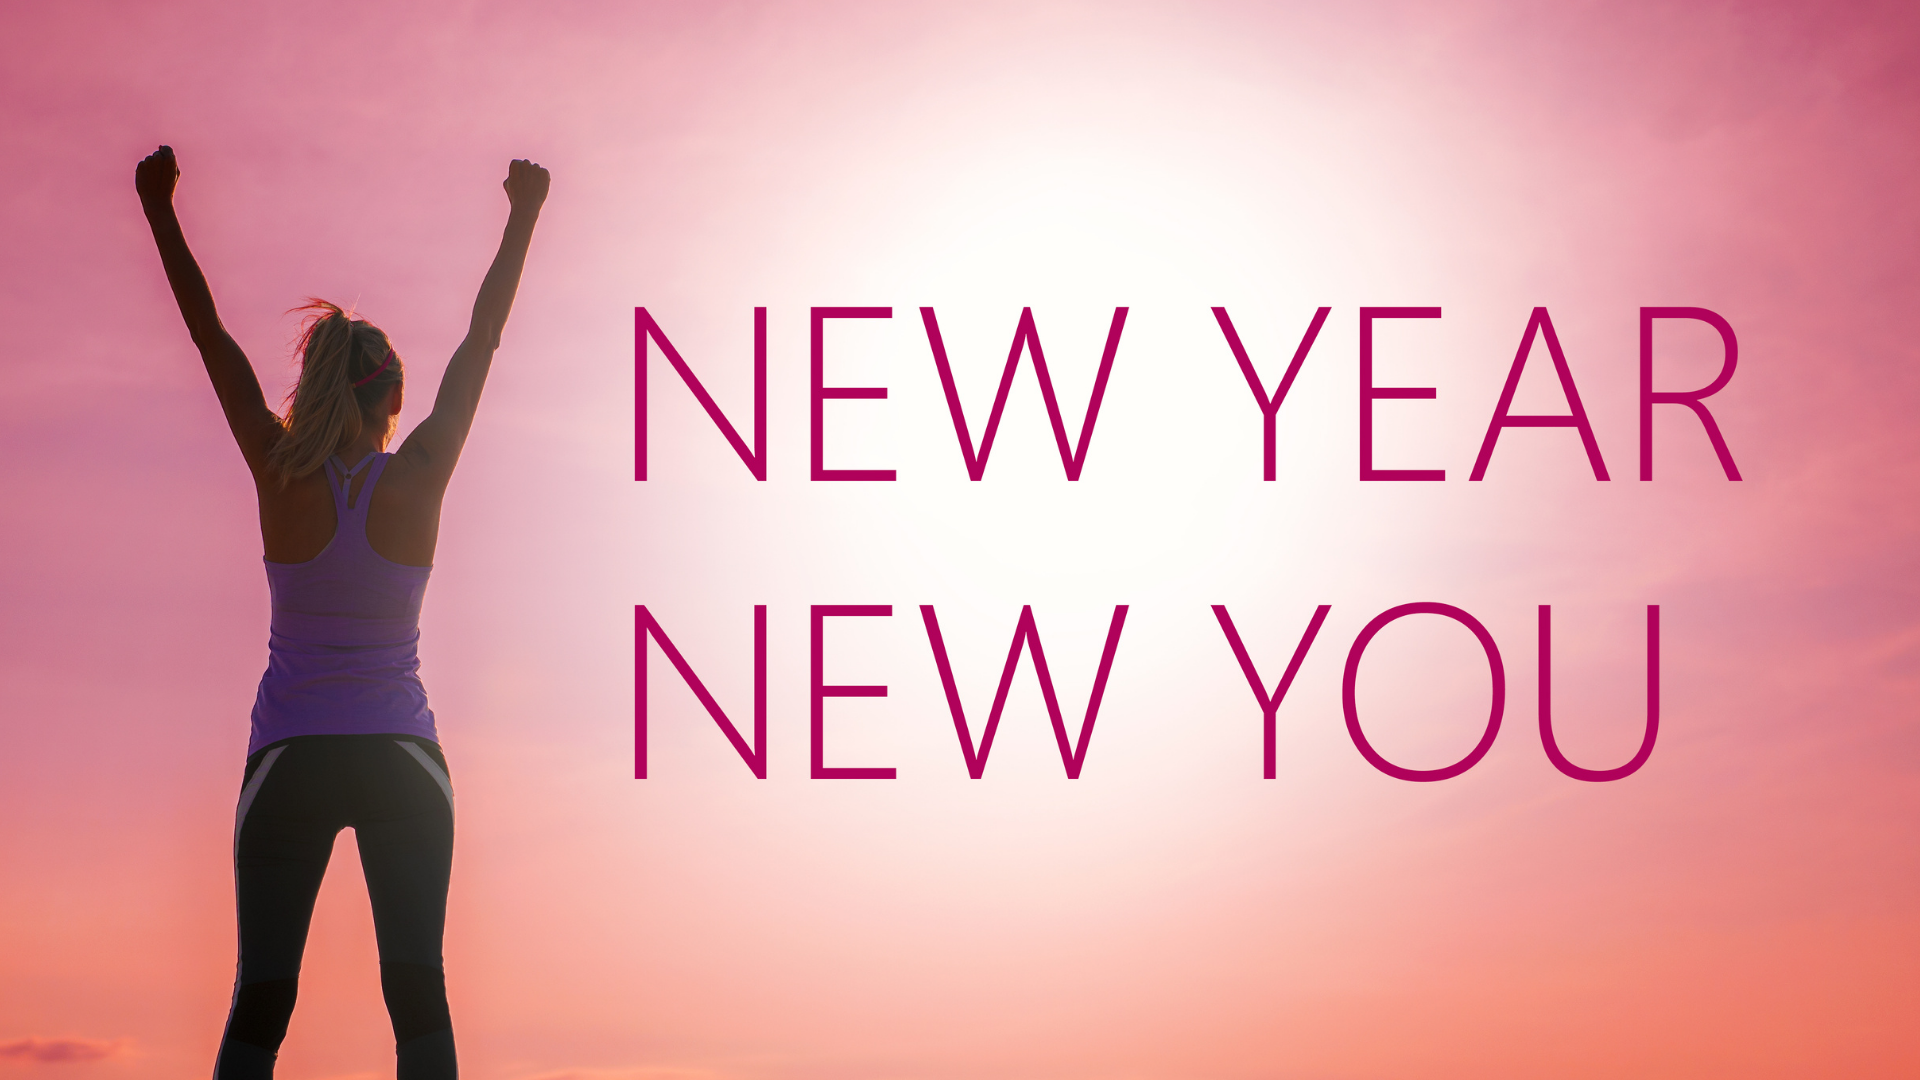 New Year, New You! Start Your Year With Renewed Energy & A Clean House